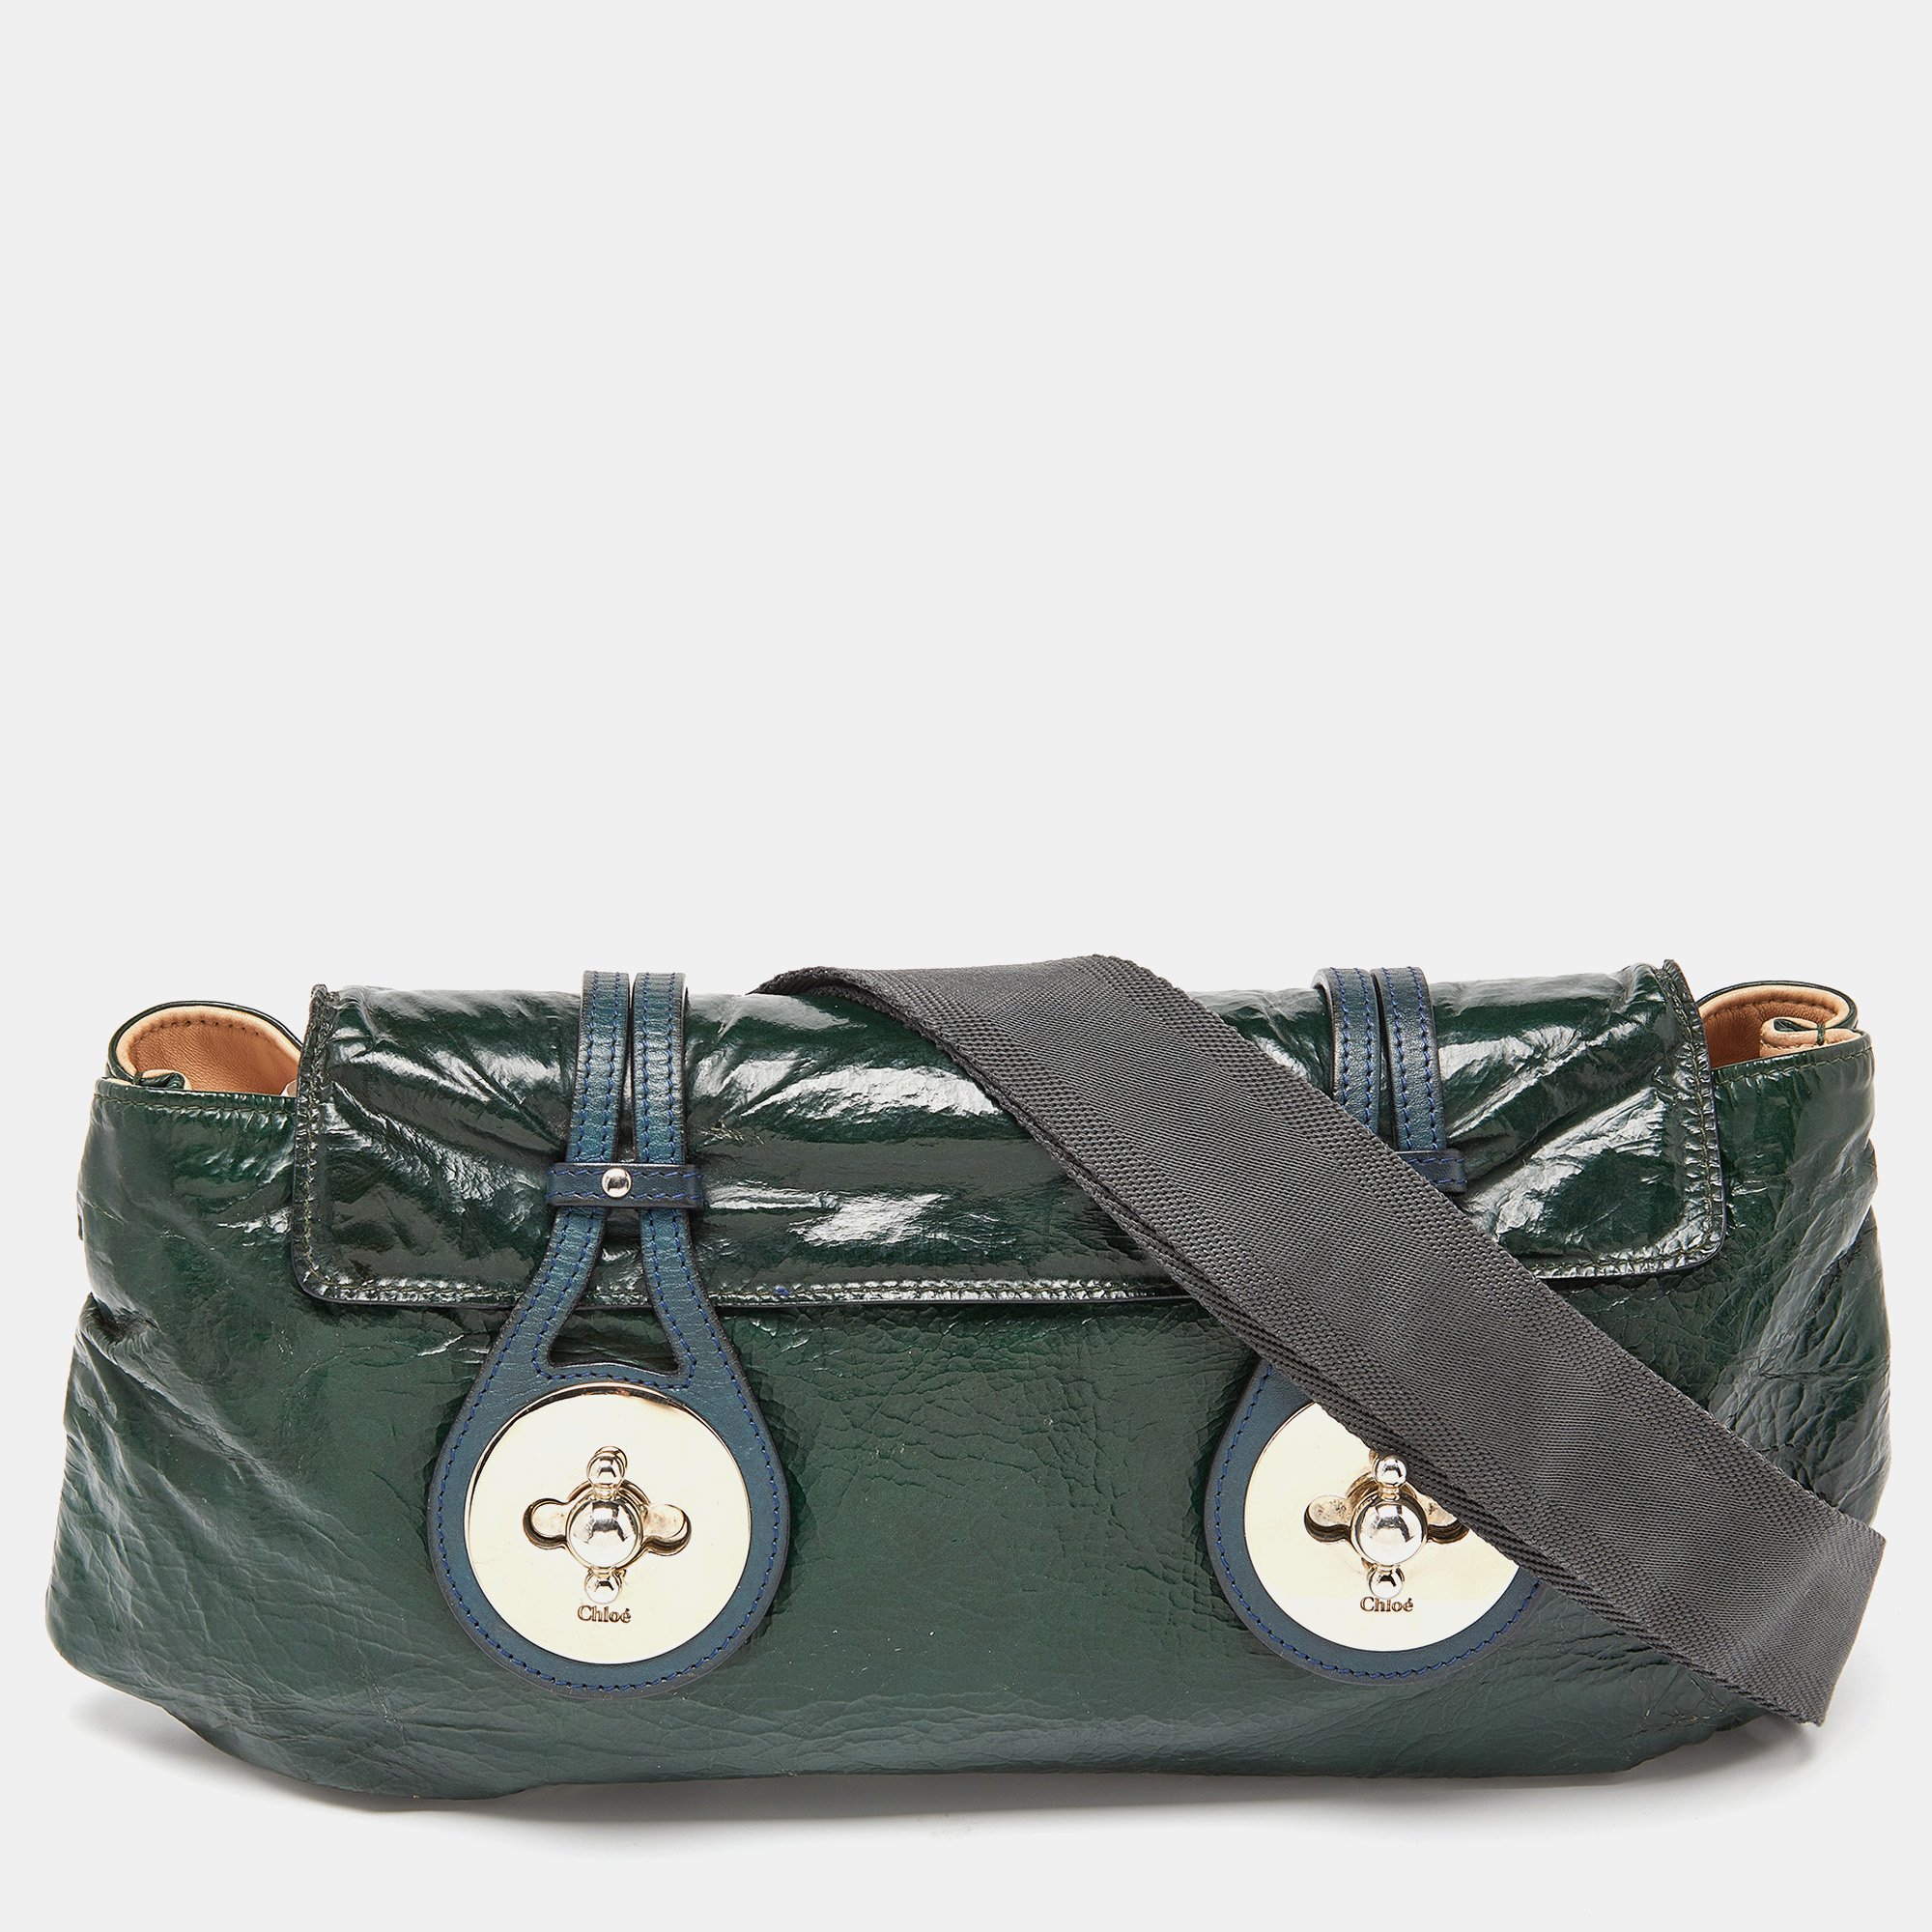 

Chloe Green Patent and Leather Flap Crossbody Bag